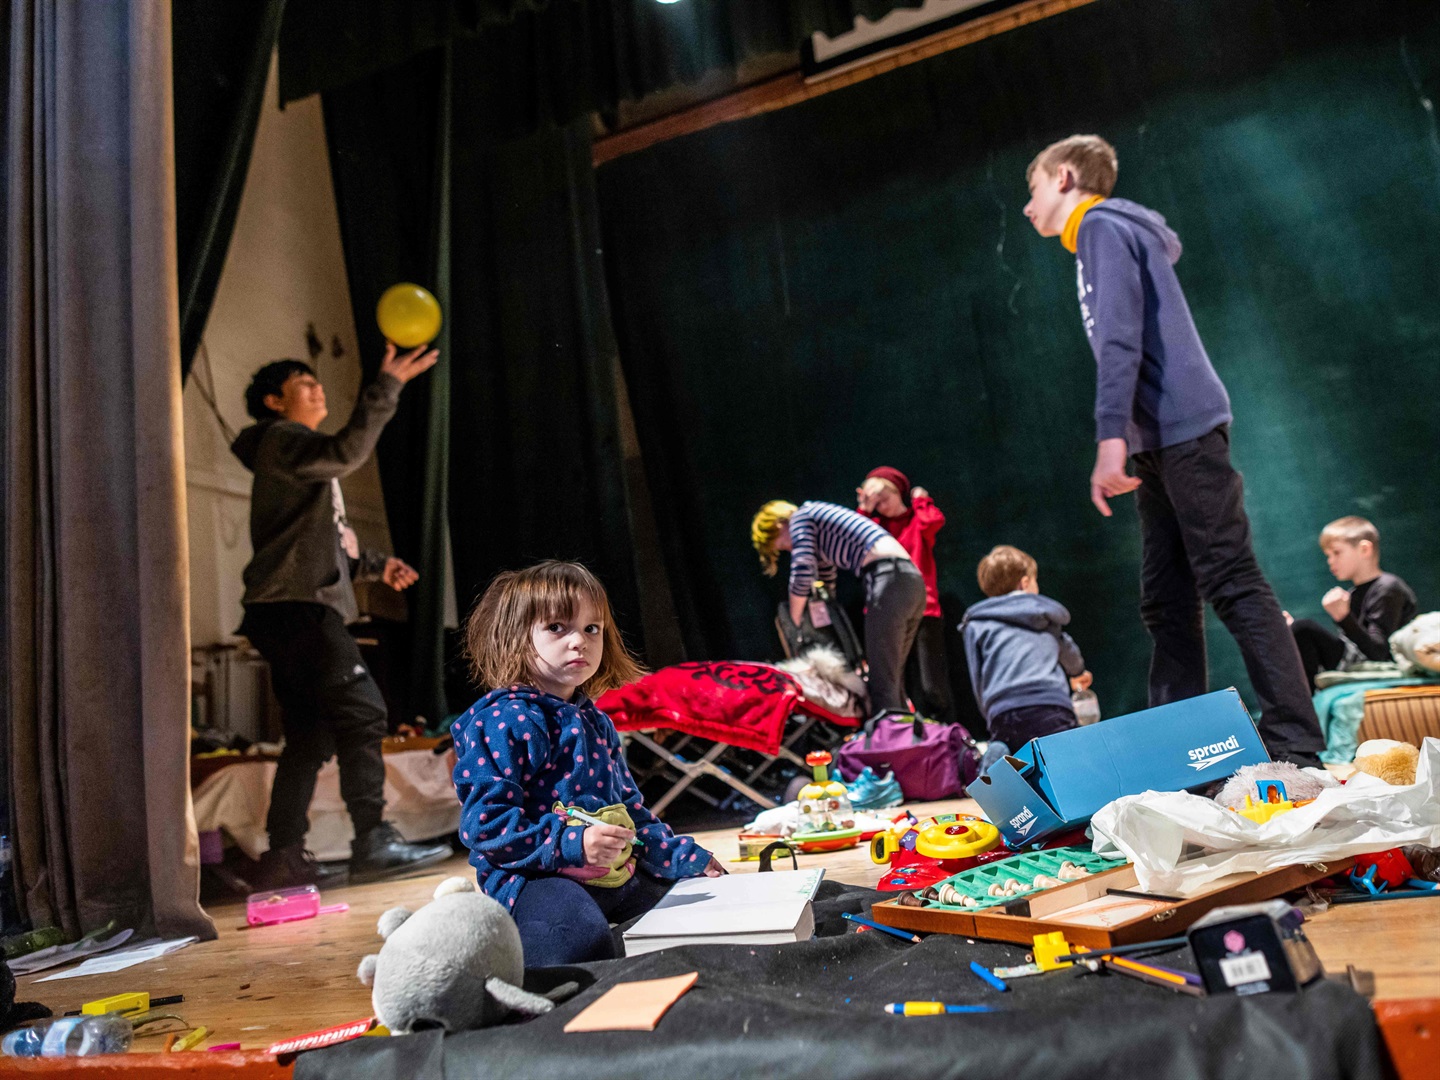 Children play on the stage of the theatre of the Ukrainian House where a shelter for refugees is installed in Przemysl, southeastern Poland, near the Ukrainian-Polish border, on March 18, 2022. Photo by WOJTEK RADWANSKI/AFP via Getty Images